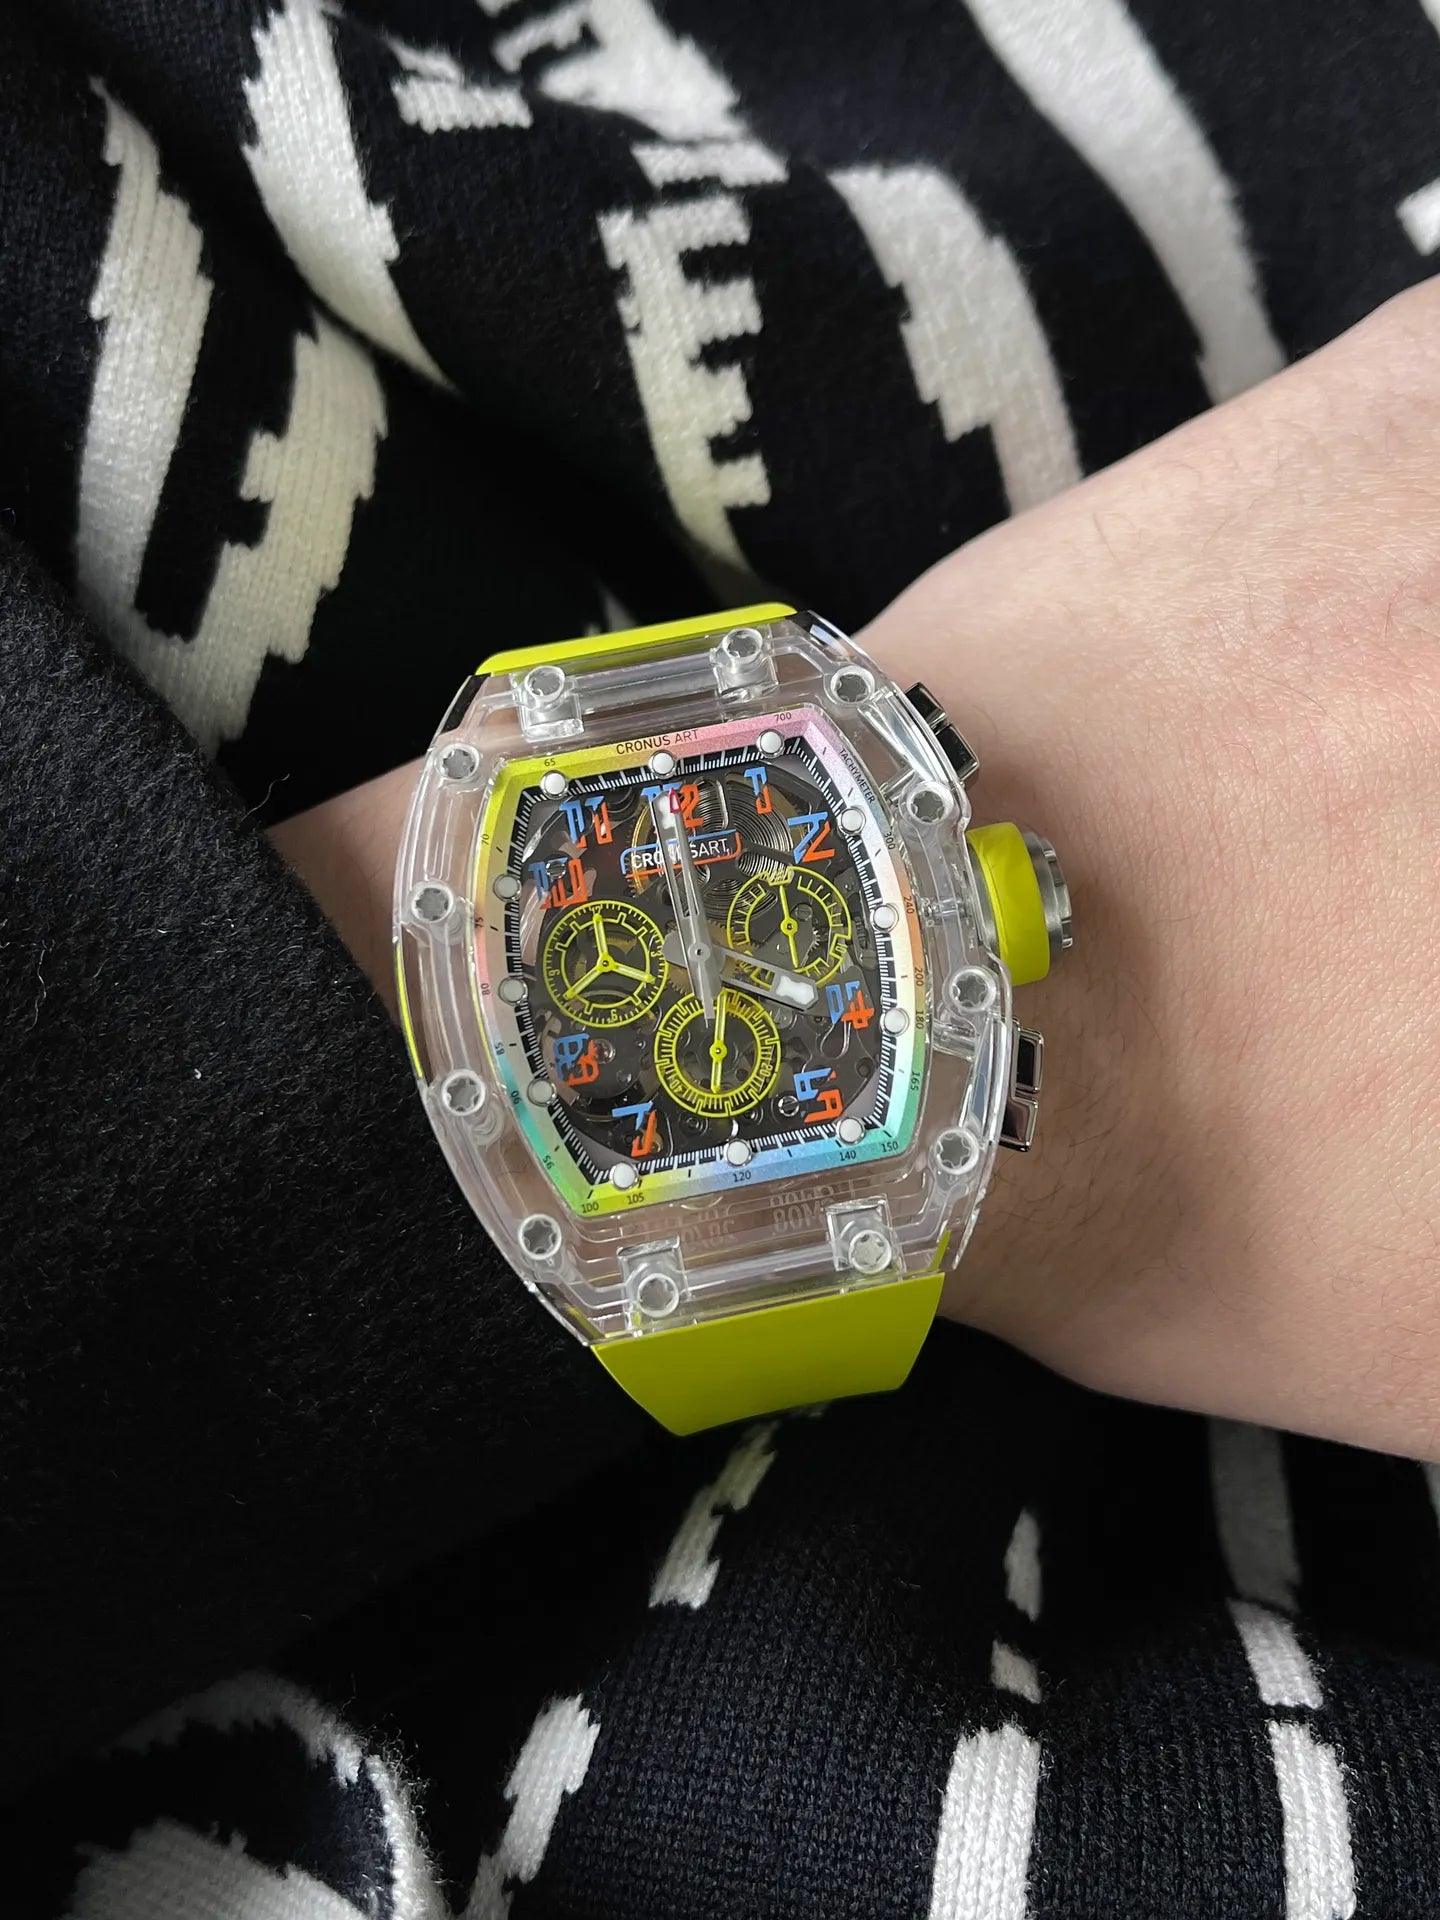 Luxury Chronograph Watch with Bold Yellow Strap